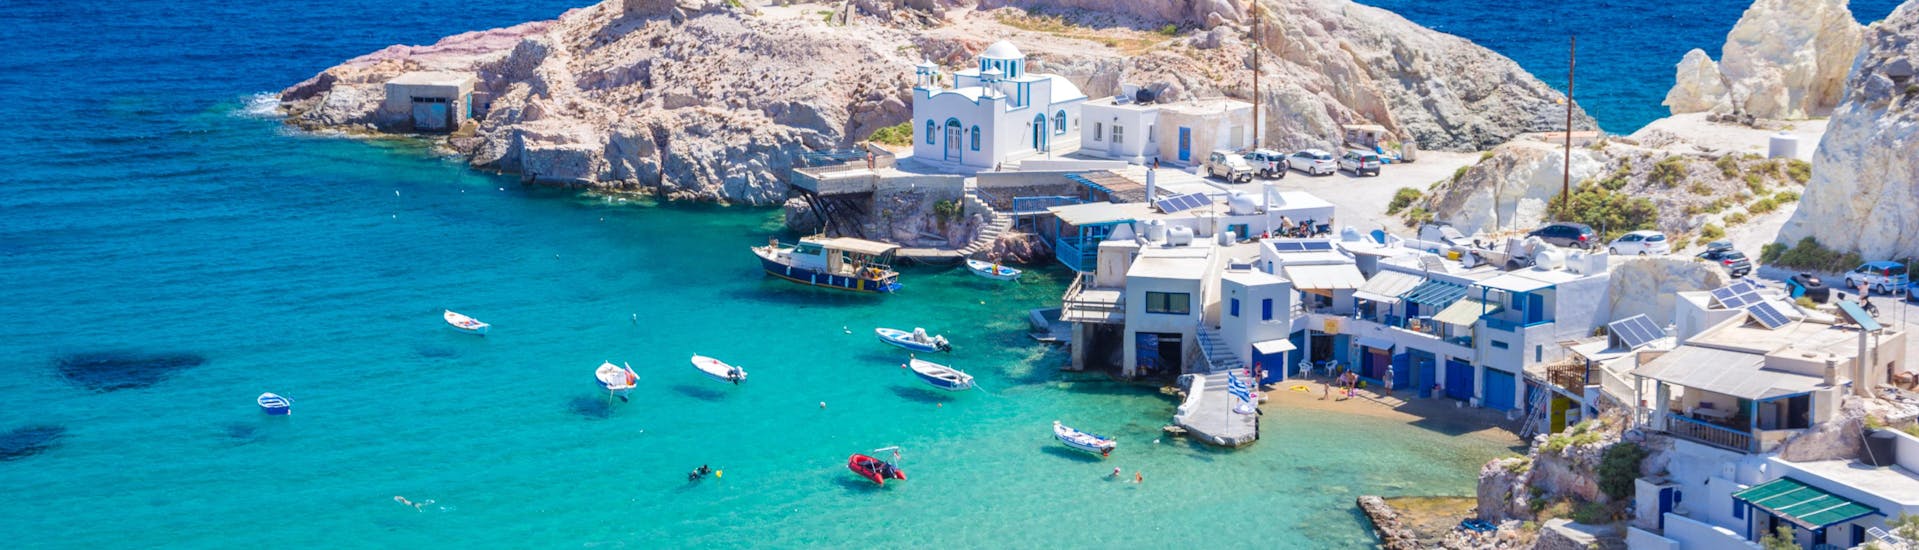 Beautiful view of Milos island during the summer with clear waters.